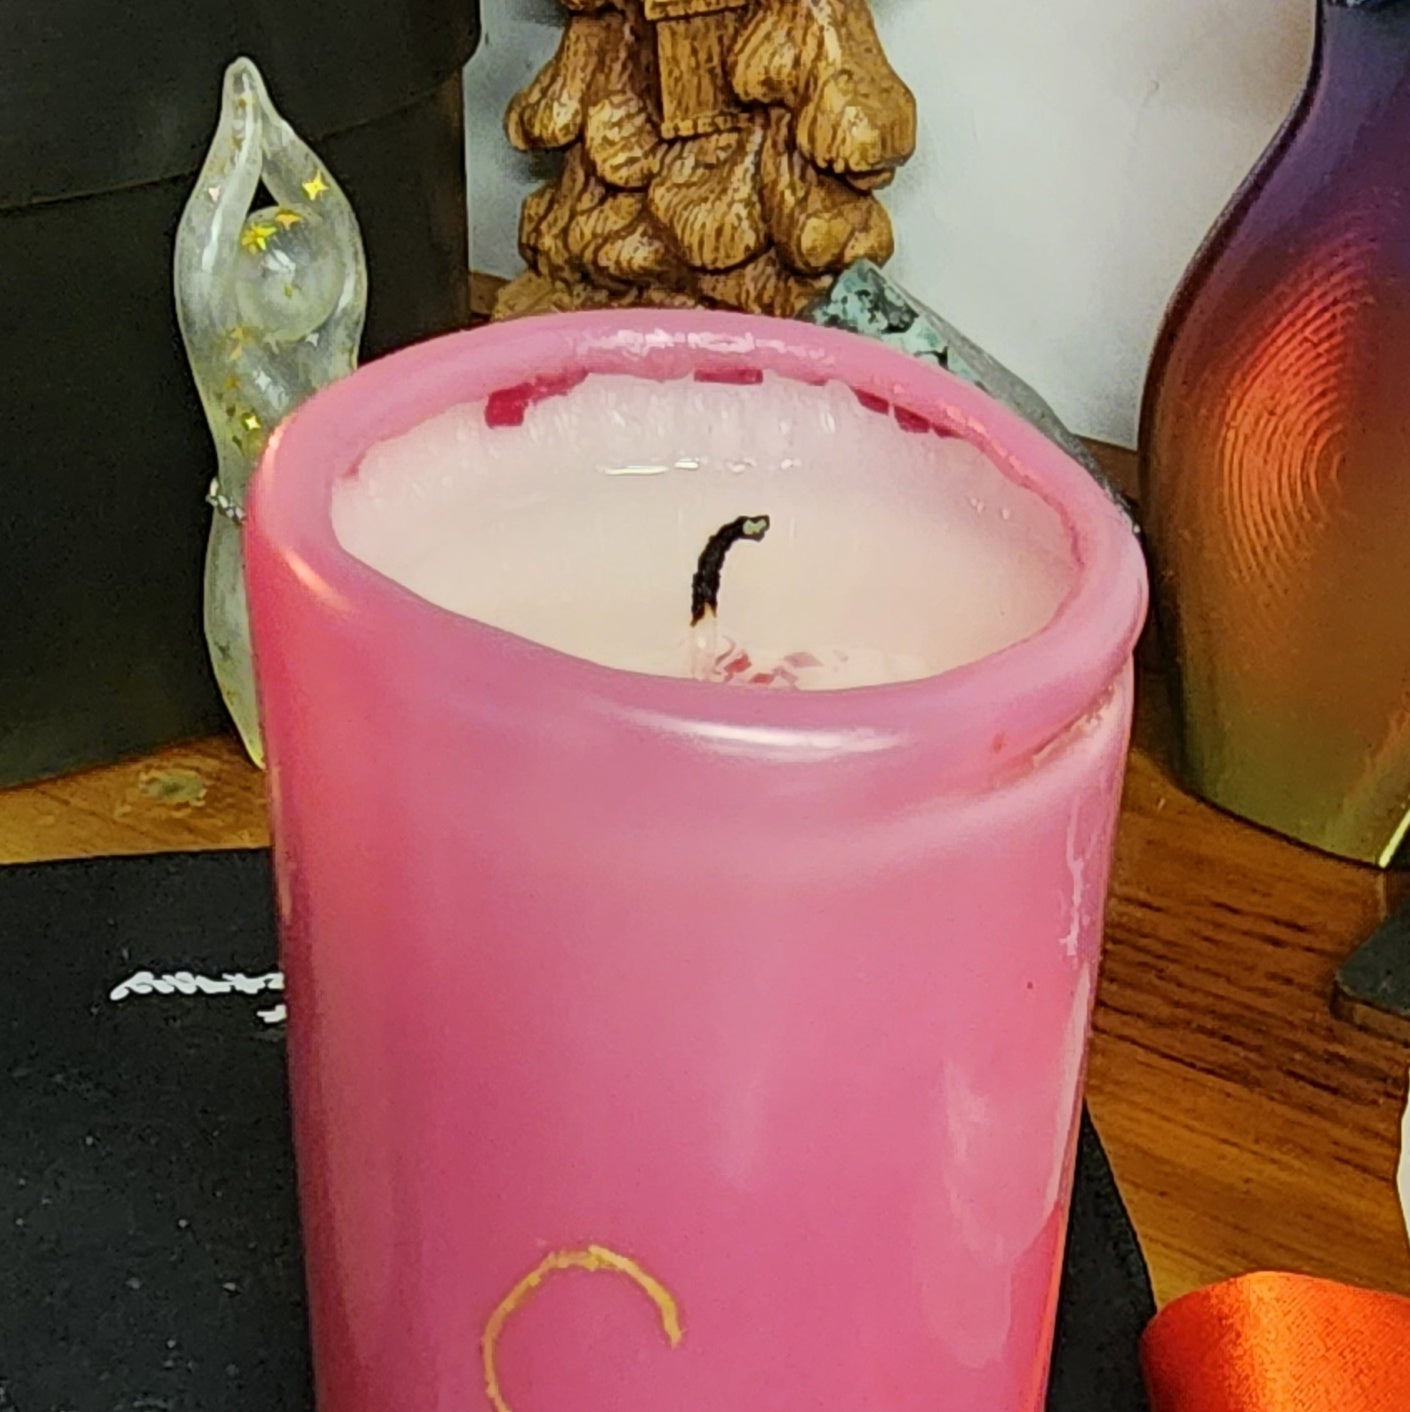 Green Pillar Candle - 2.25 x 6 inches, 42 hour burn time